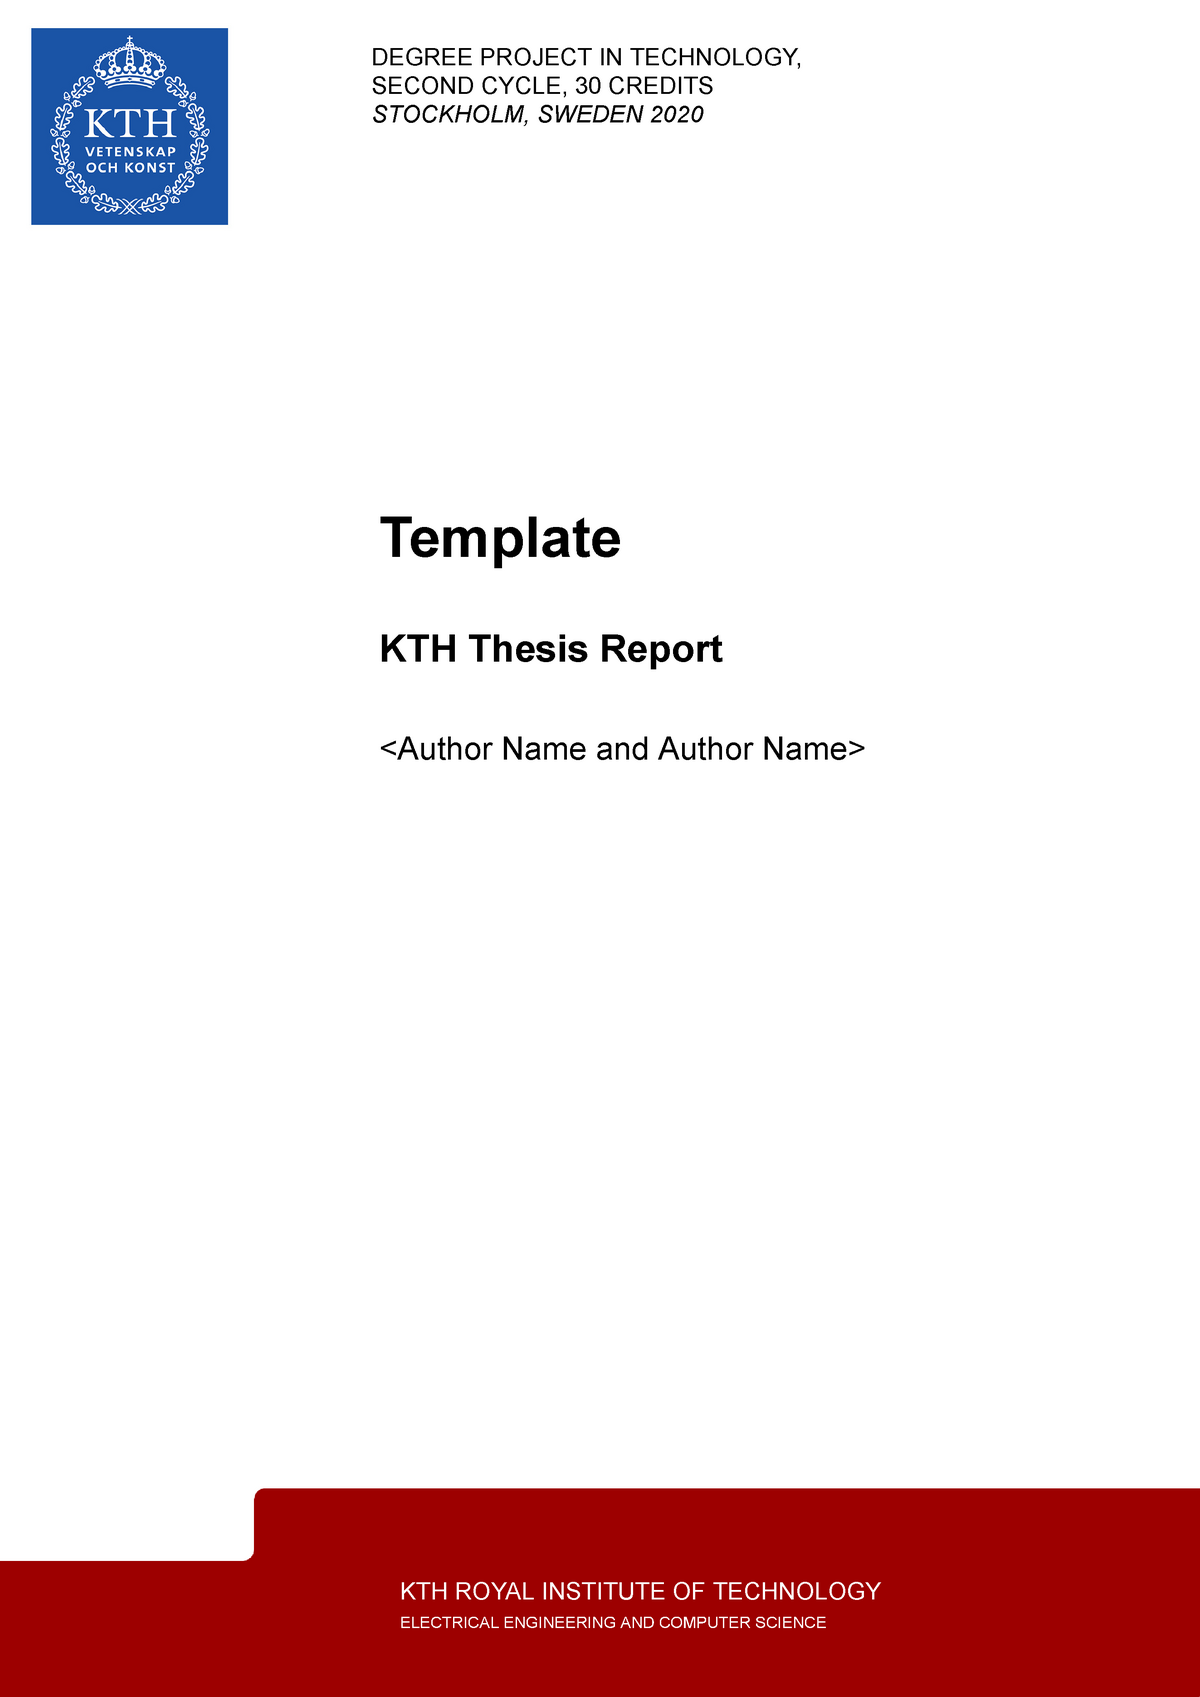 kth phd thesis template